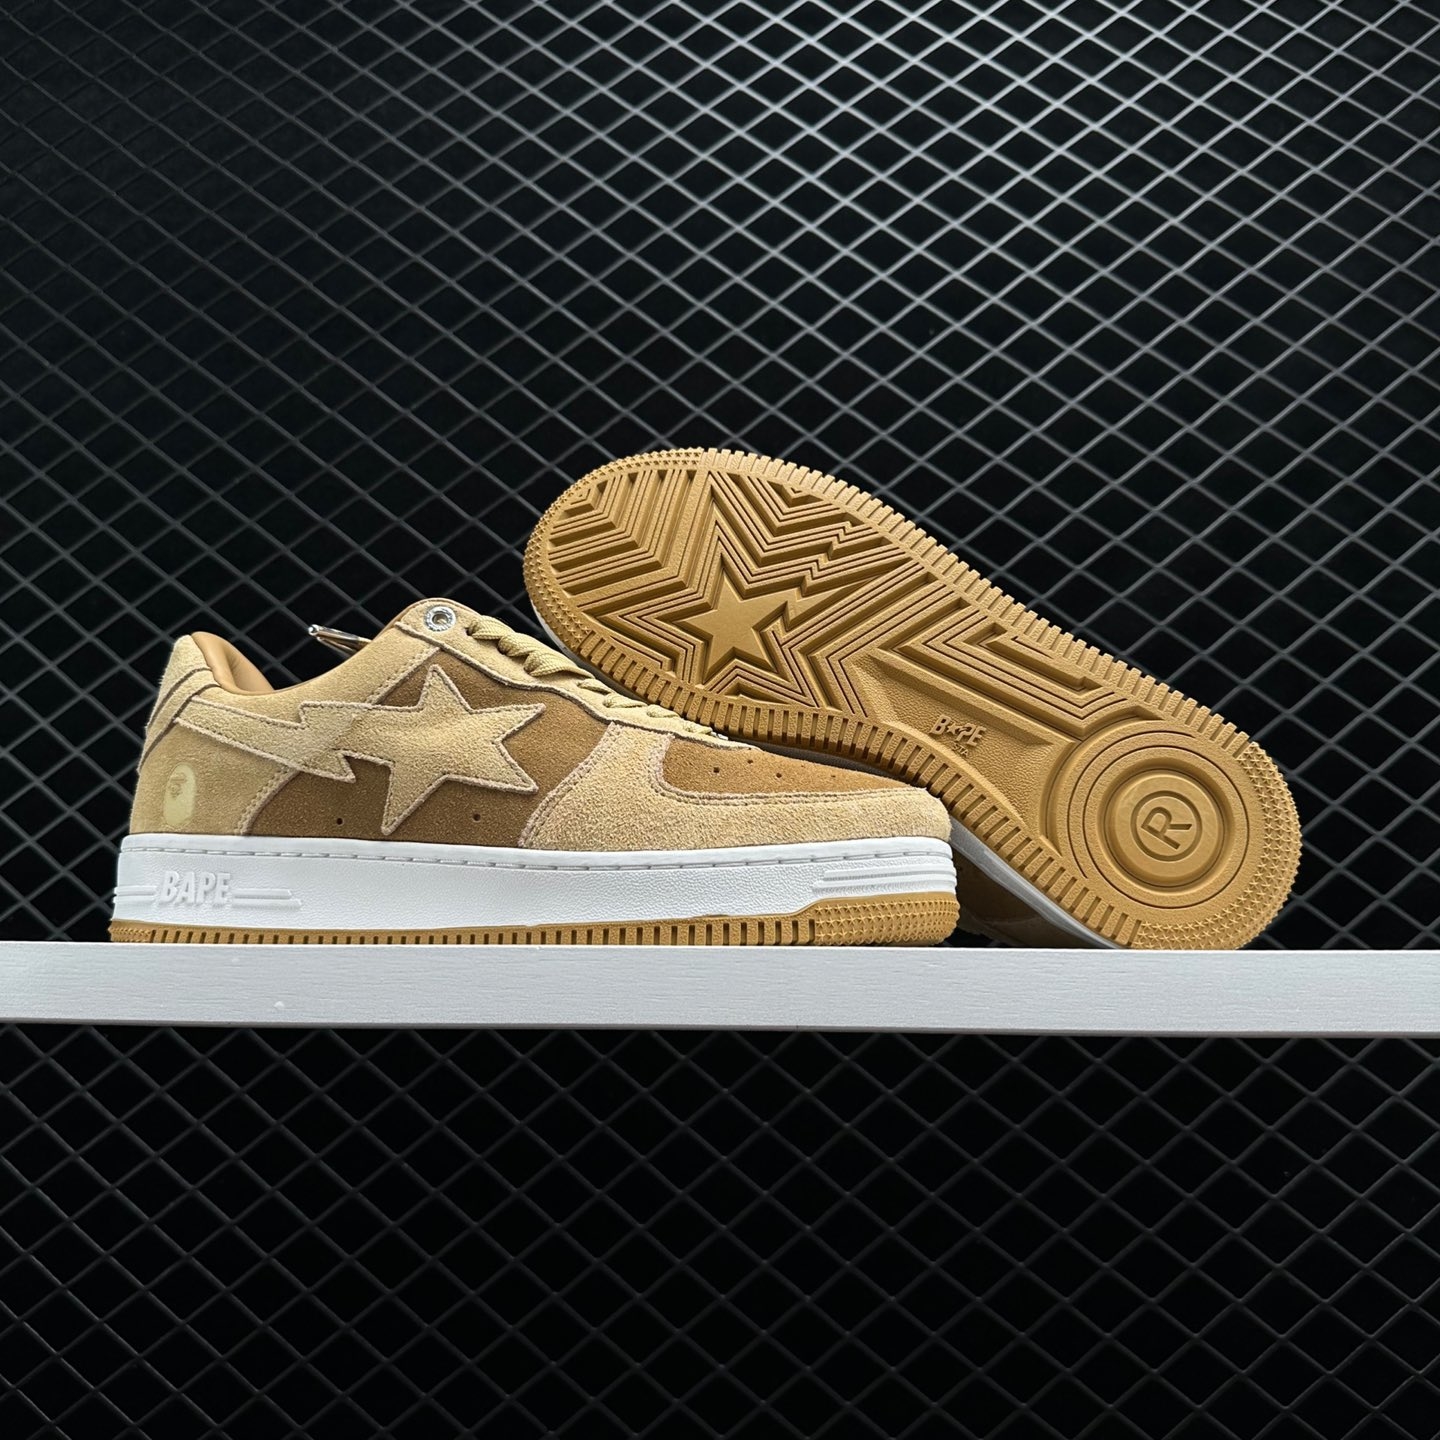 A Bathing Ape Bape Sta Beige Suede - Premium Sneakers for Style Enthusiasts